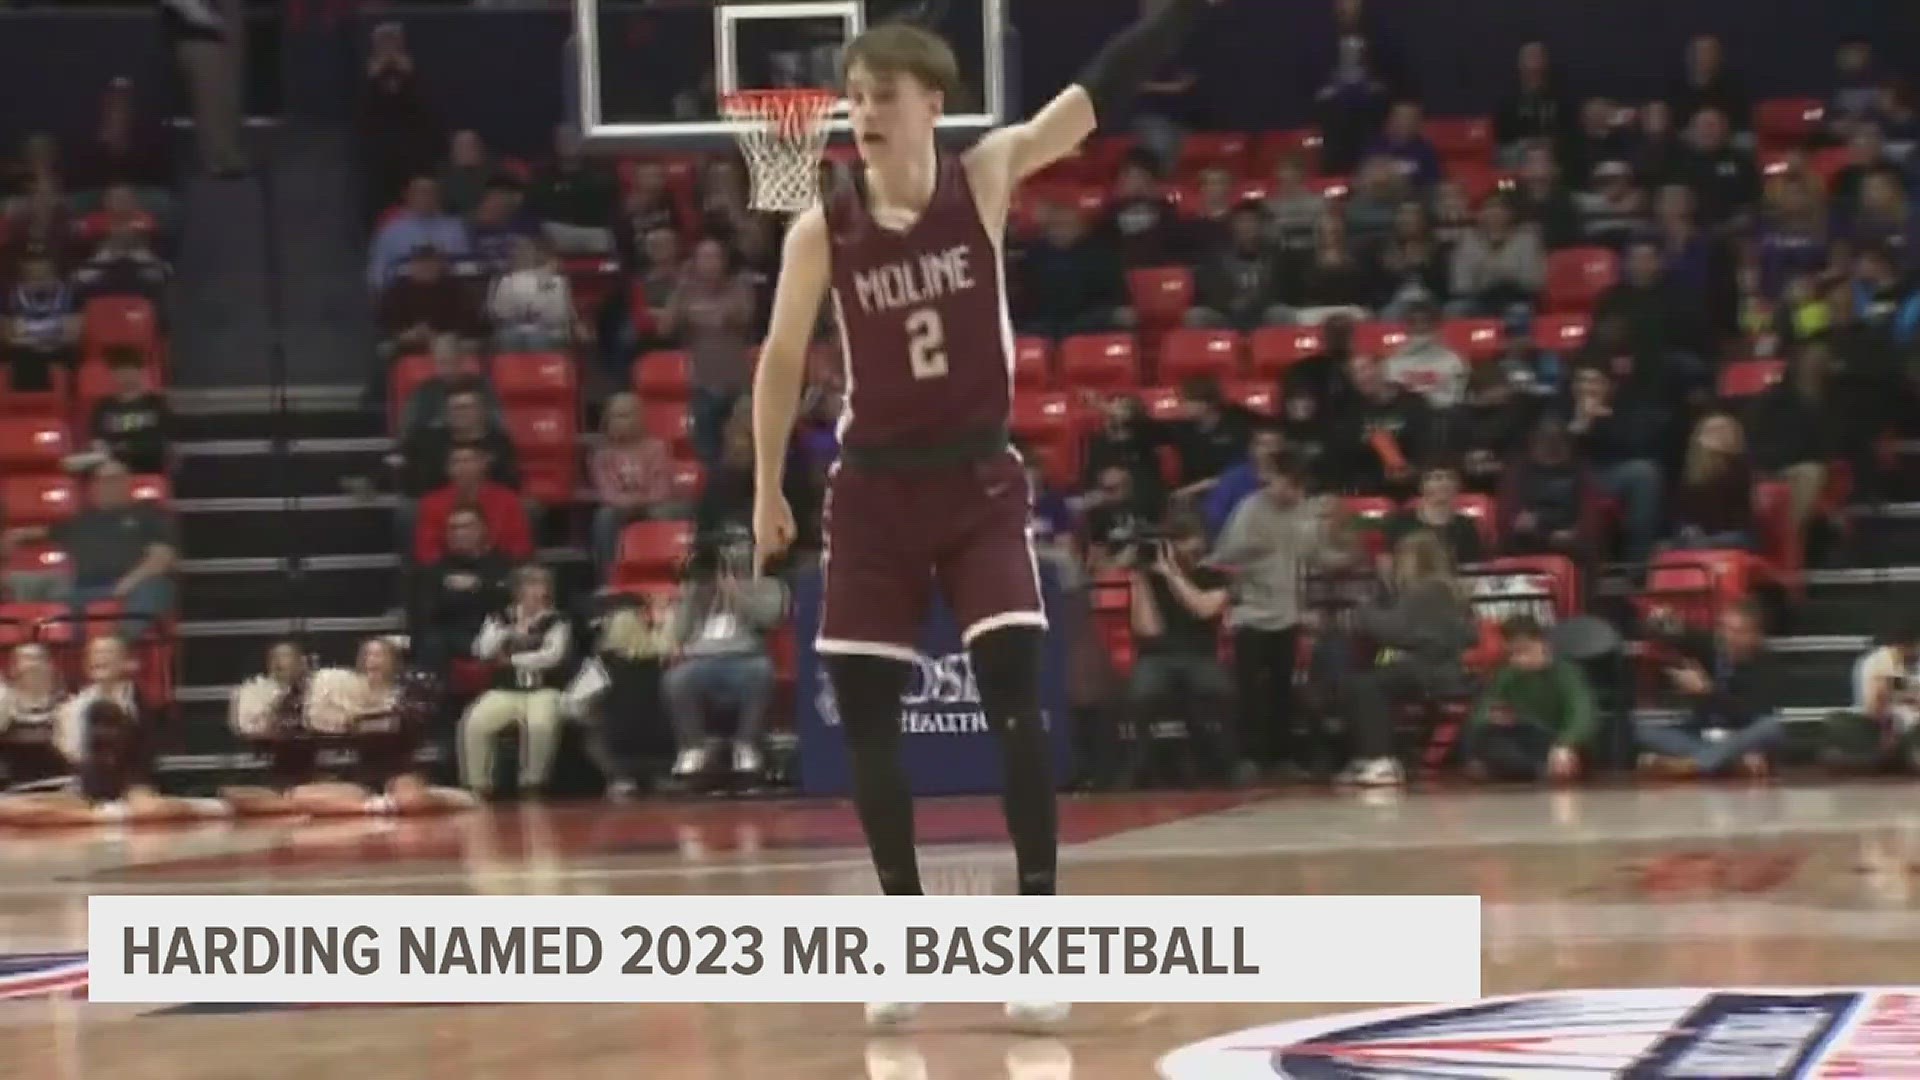 Harding had a sensational 2022-23 season, scoring 18 points per game and leading Moline High School to its first state title in school history.